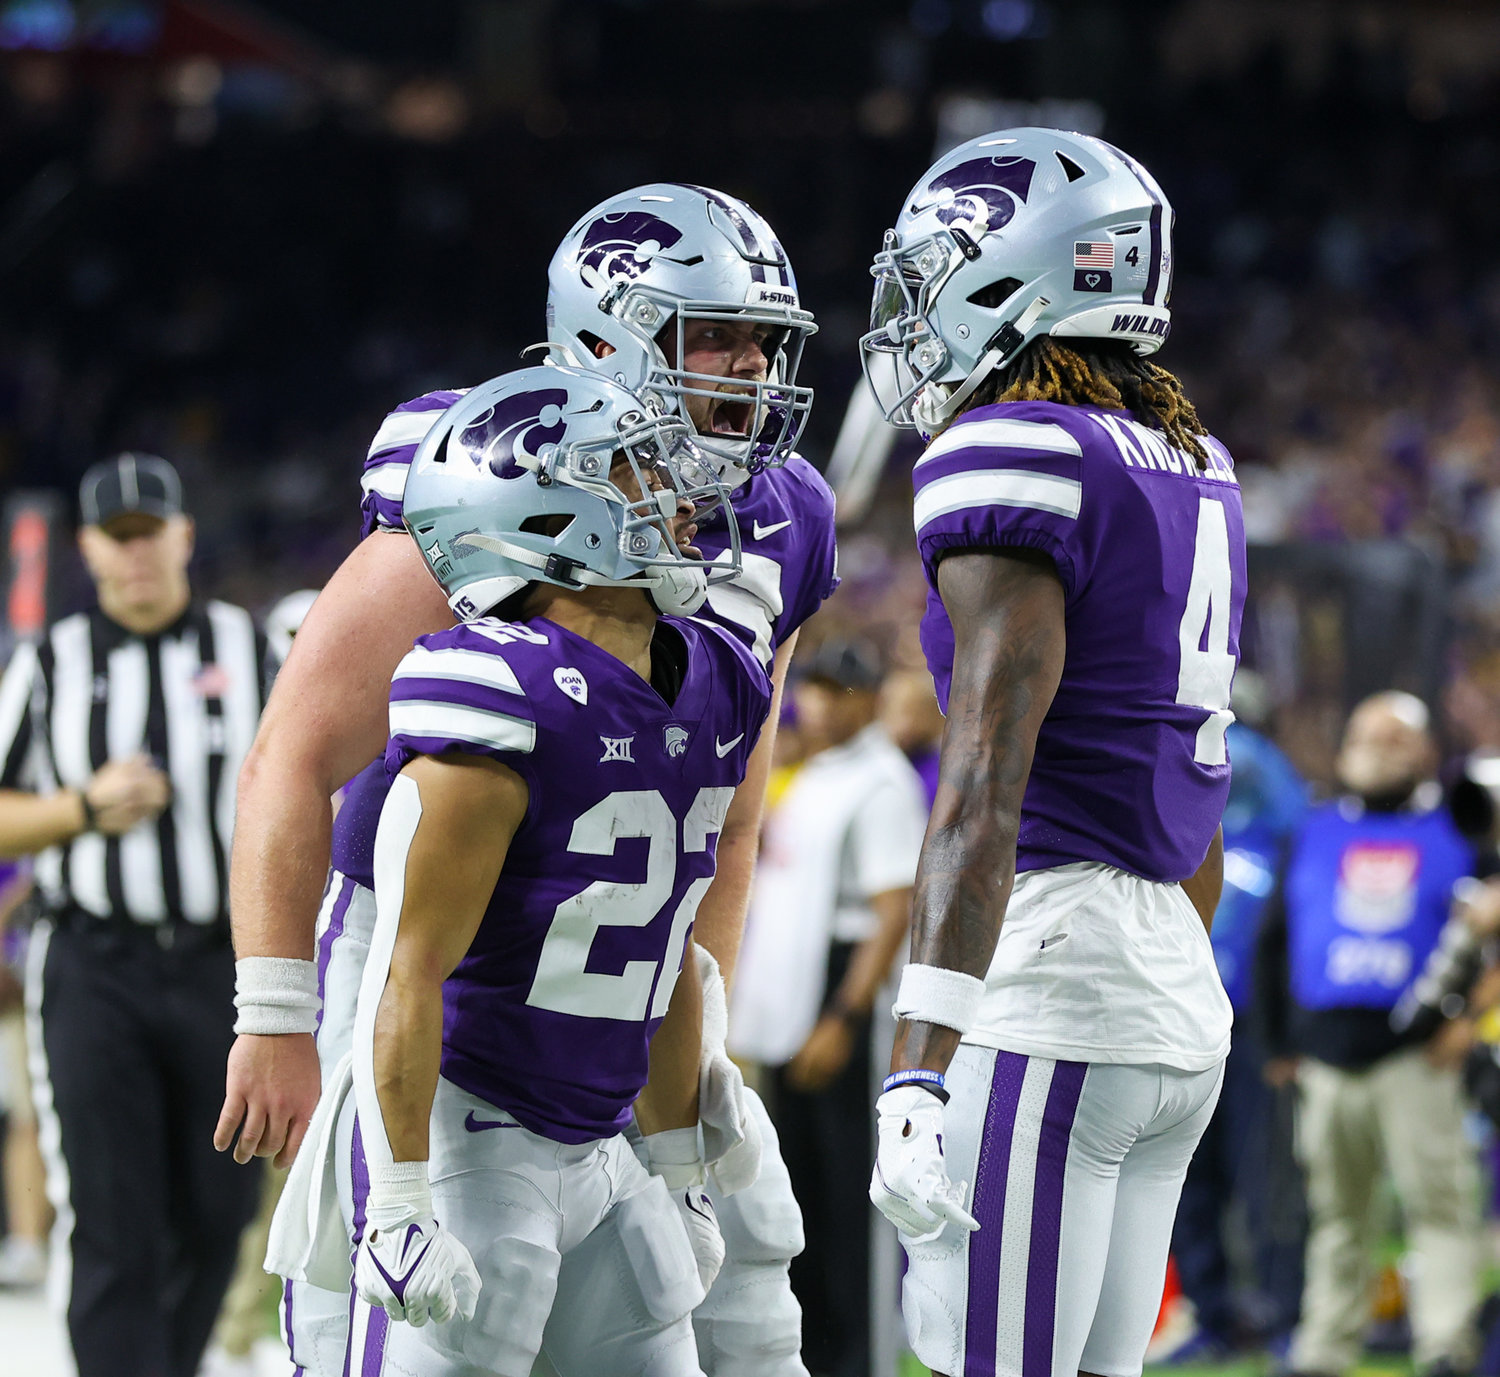 Teammates congratulate Kansas State Wildcats wide receiver Malik Knowles (4) after a touchdown reception during the TaxAct Texas Bowl on Jan. 4, 2022 in Houston, Texas.